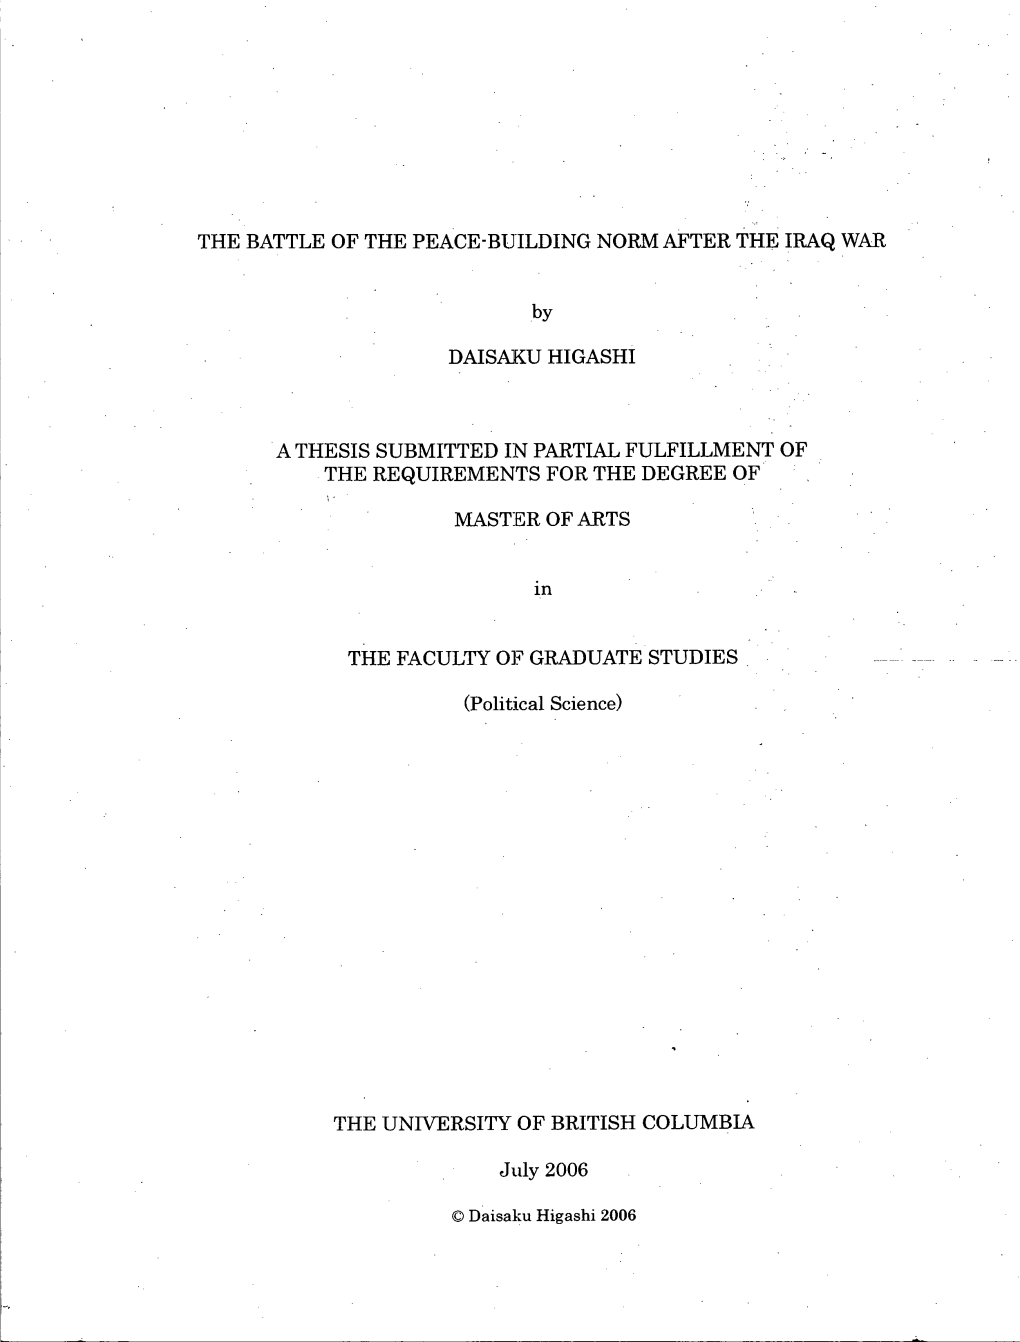 THE BATTLE of the PEACE-BUILDING NORM AFTER the IRAQ WAR by DAISAKU HIGASHI a THESIS SUBMITTED in PARTIAL FULFILLMENT of THE